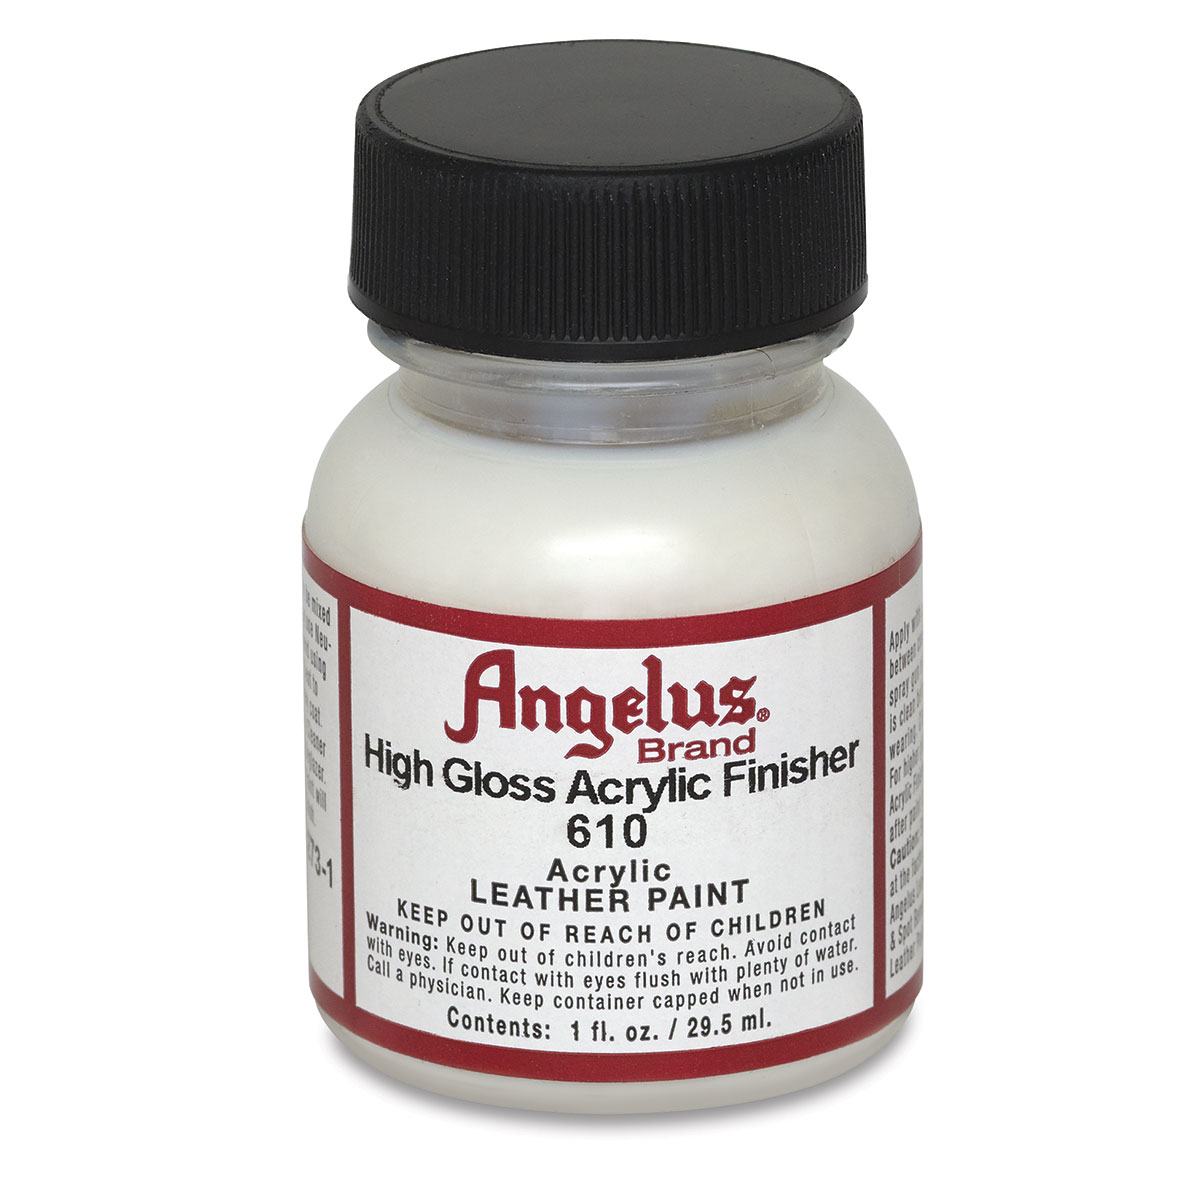 Angelus Acrylic Finisher High Gloss Clear Quart - Fore Supply Company